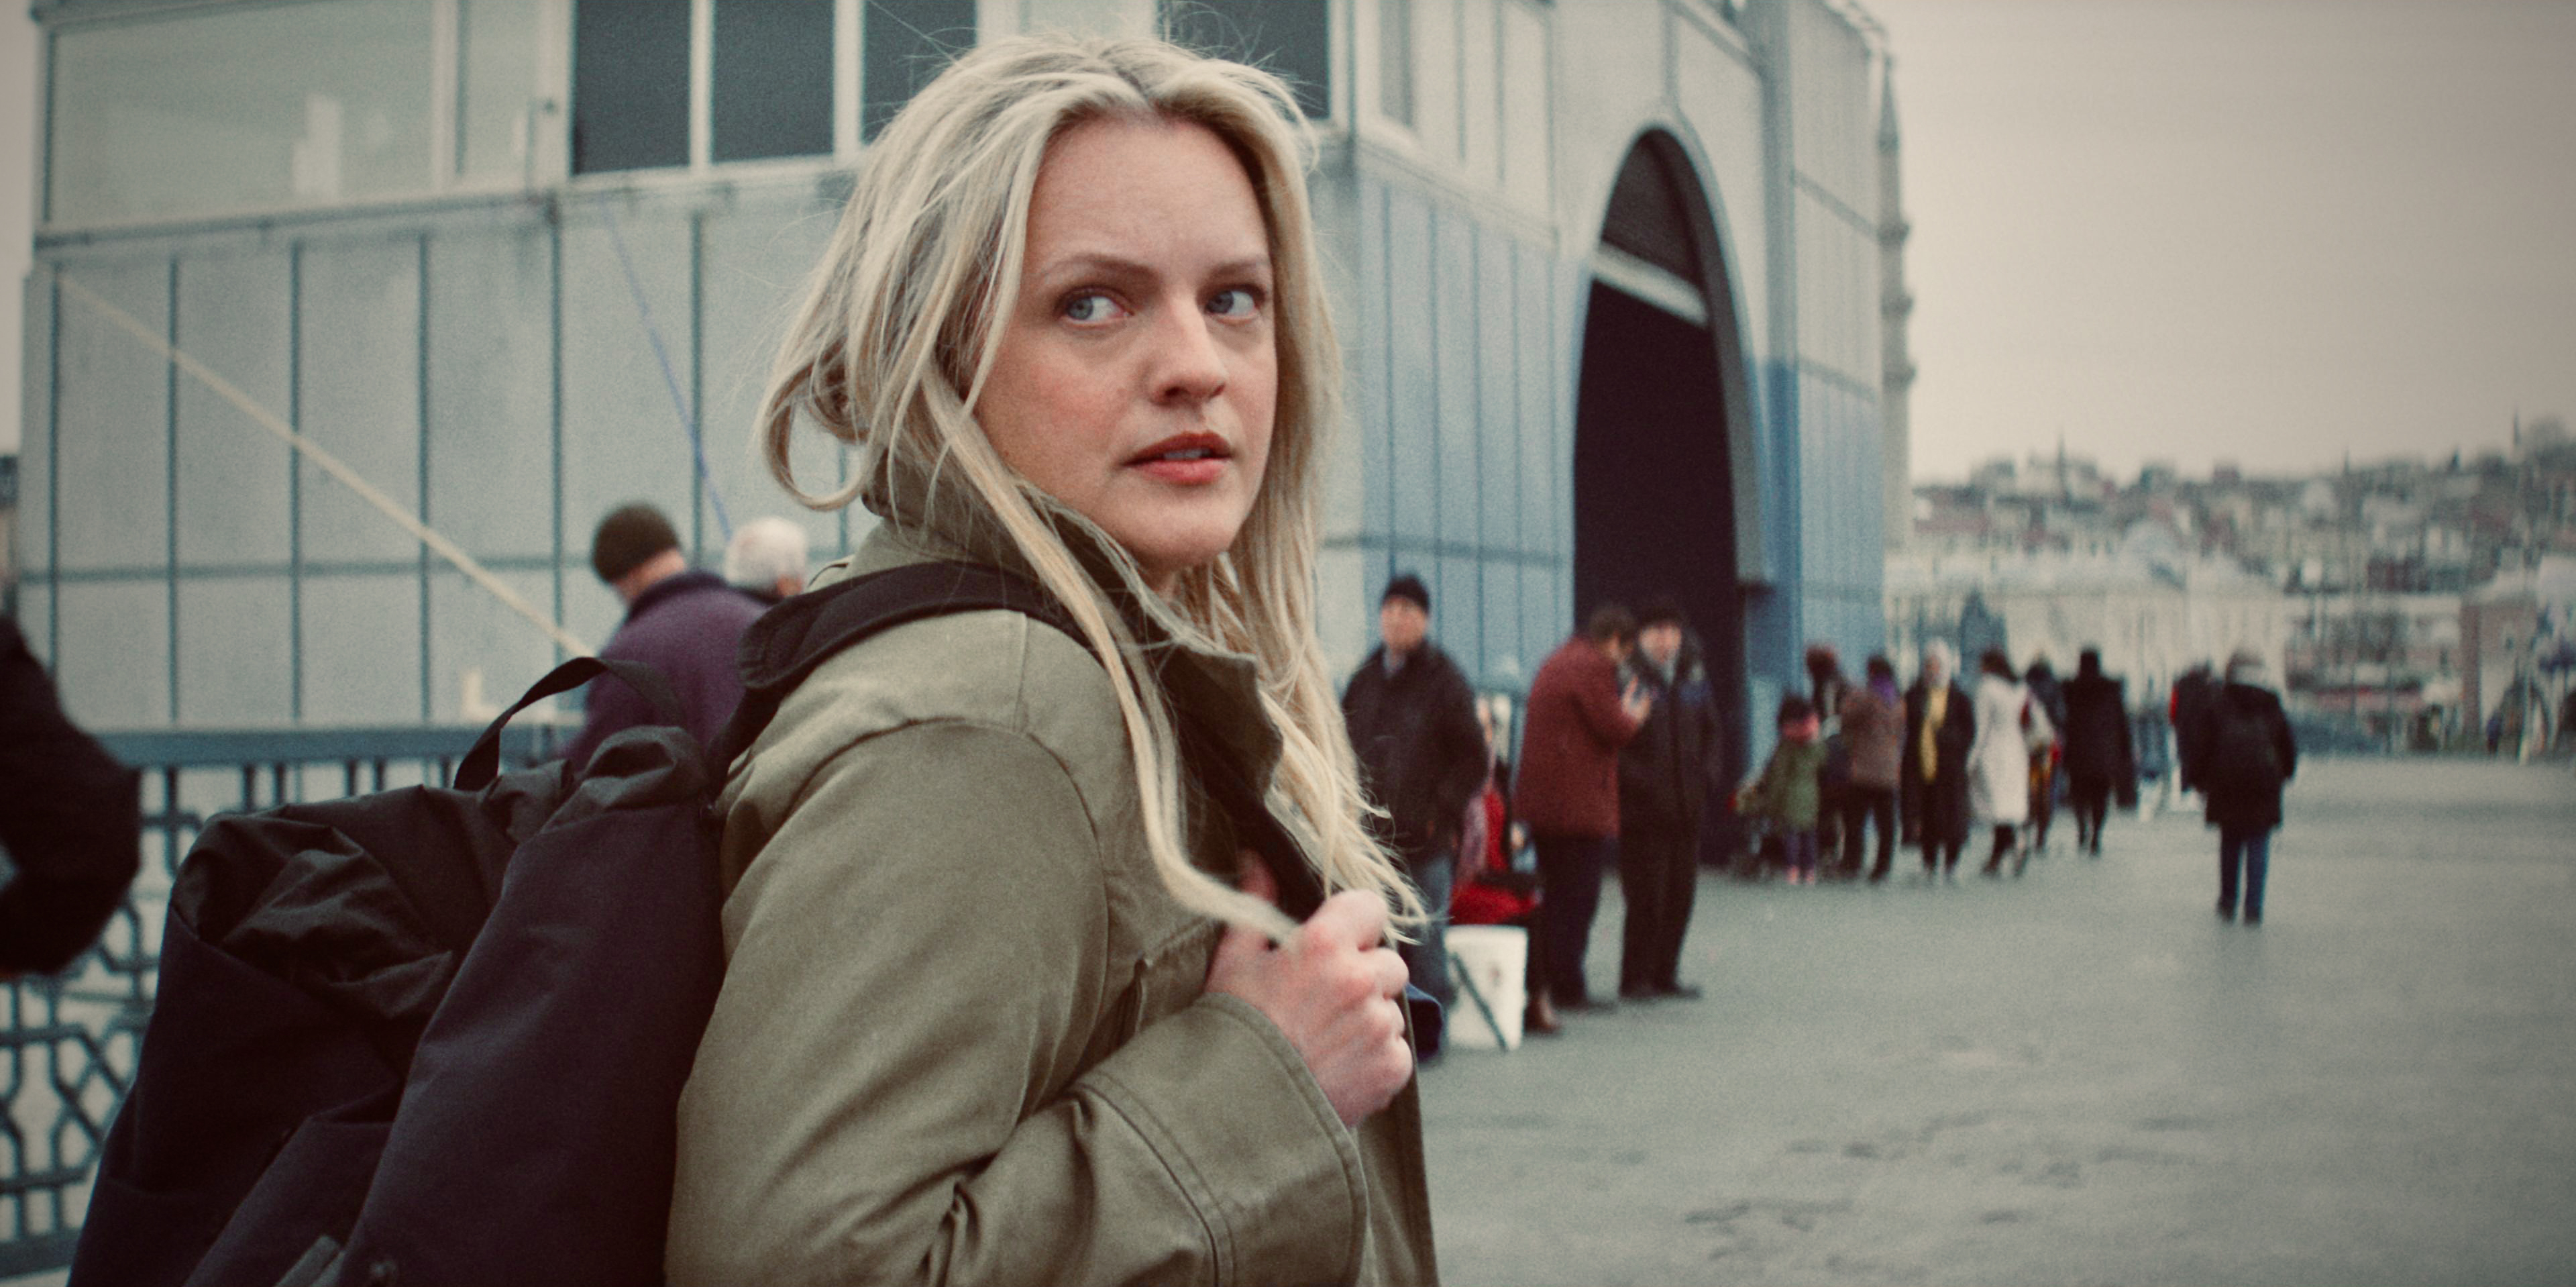 Elisabeth Moss on a crowded street, looking back over her shoulder, a tense expression on her face